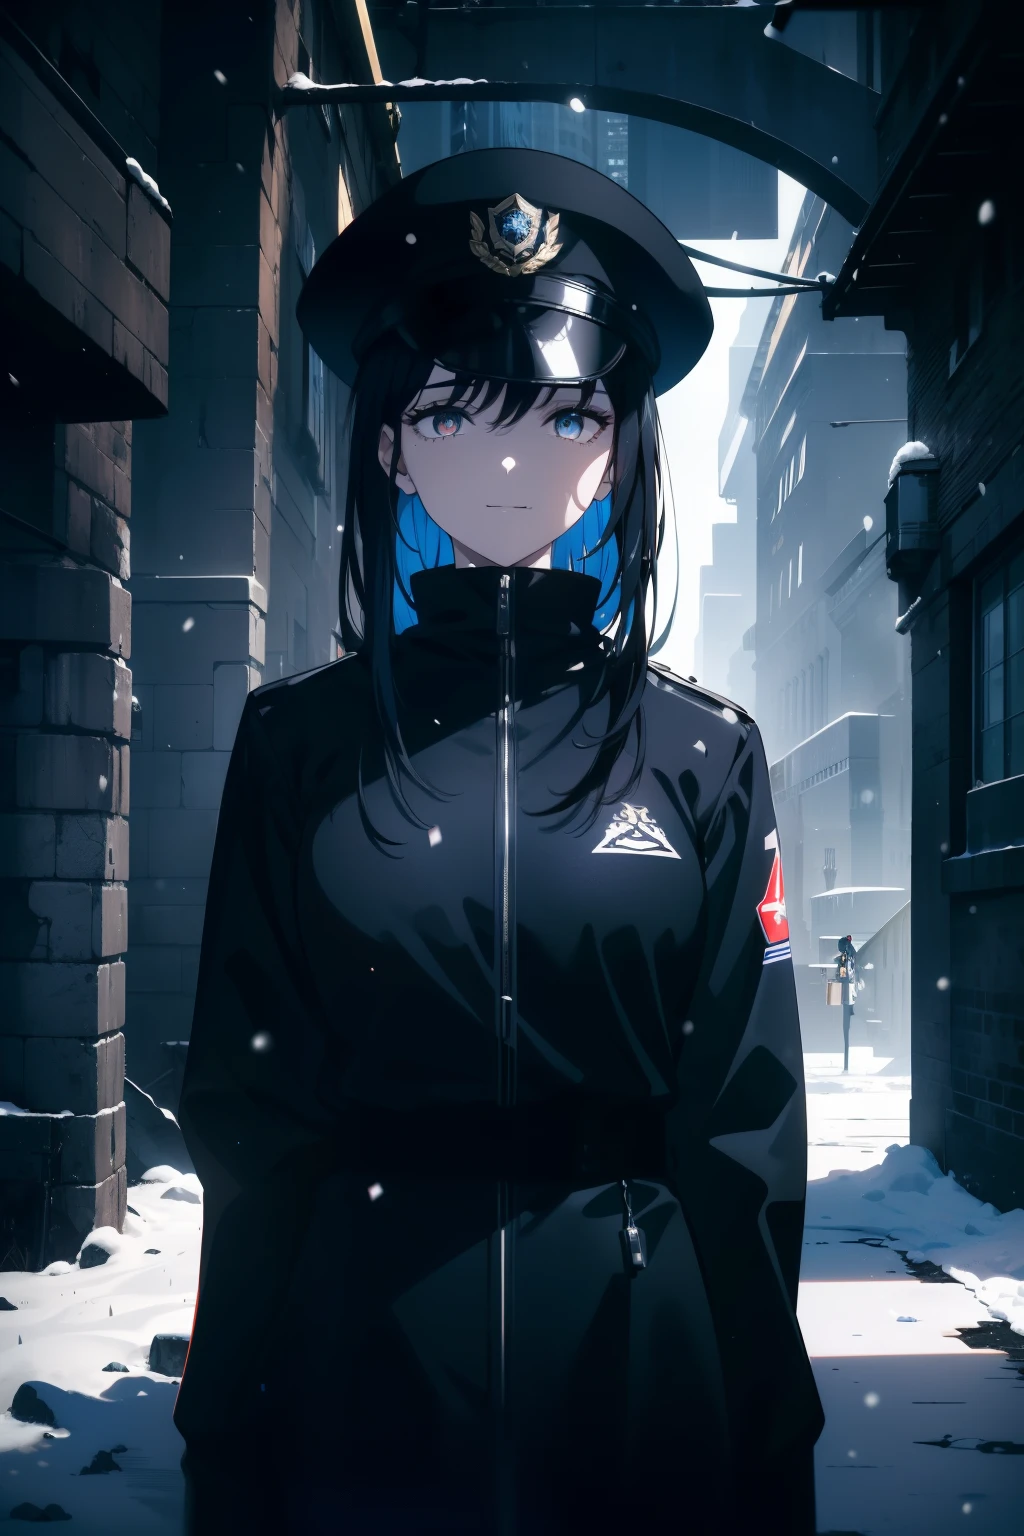 ((Obra maestra, La mejor calidad, ultrahigh resolution)), ((two woman, in foreground, subject focuses)), ((((standing next to each other)))), confidant stances, ((((two police officers, wearing blue police attire, police)))), (wearing beat cop hat black, black beat cop hat), ((black hair, dark black hair)), long hair cut, pale skin, ((brown eyes)), glowing_eyes, neon eyes, (ultra detailed eyes:0.7, beautiful and detailed faces, detailed eyes:0.9), ((centered)), smile, facing viewer, eye level, ((vibrant background, snowy landscape, cityscape, snowing, snow)), flat chested, looking at viewer, ((half closed eyes)), ((perfect hands)), ((heads:1, armored arms, hips, elbows, in view:1)), (((hands behind back))), empty eyes, beautiful lighting, outside, outdoors, background, defined subject, (25 years old), (((close to viewer)))